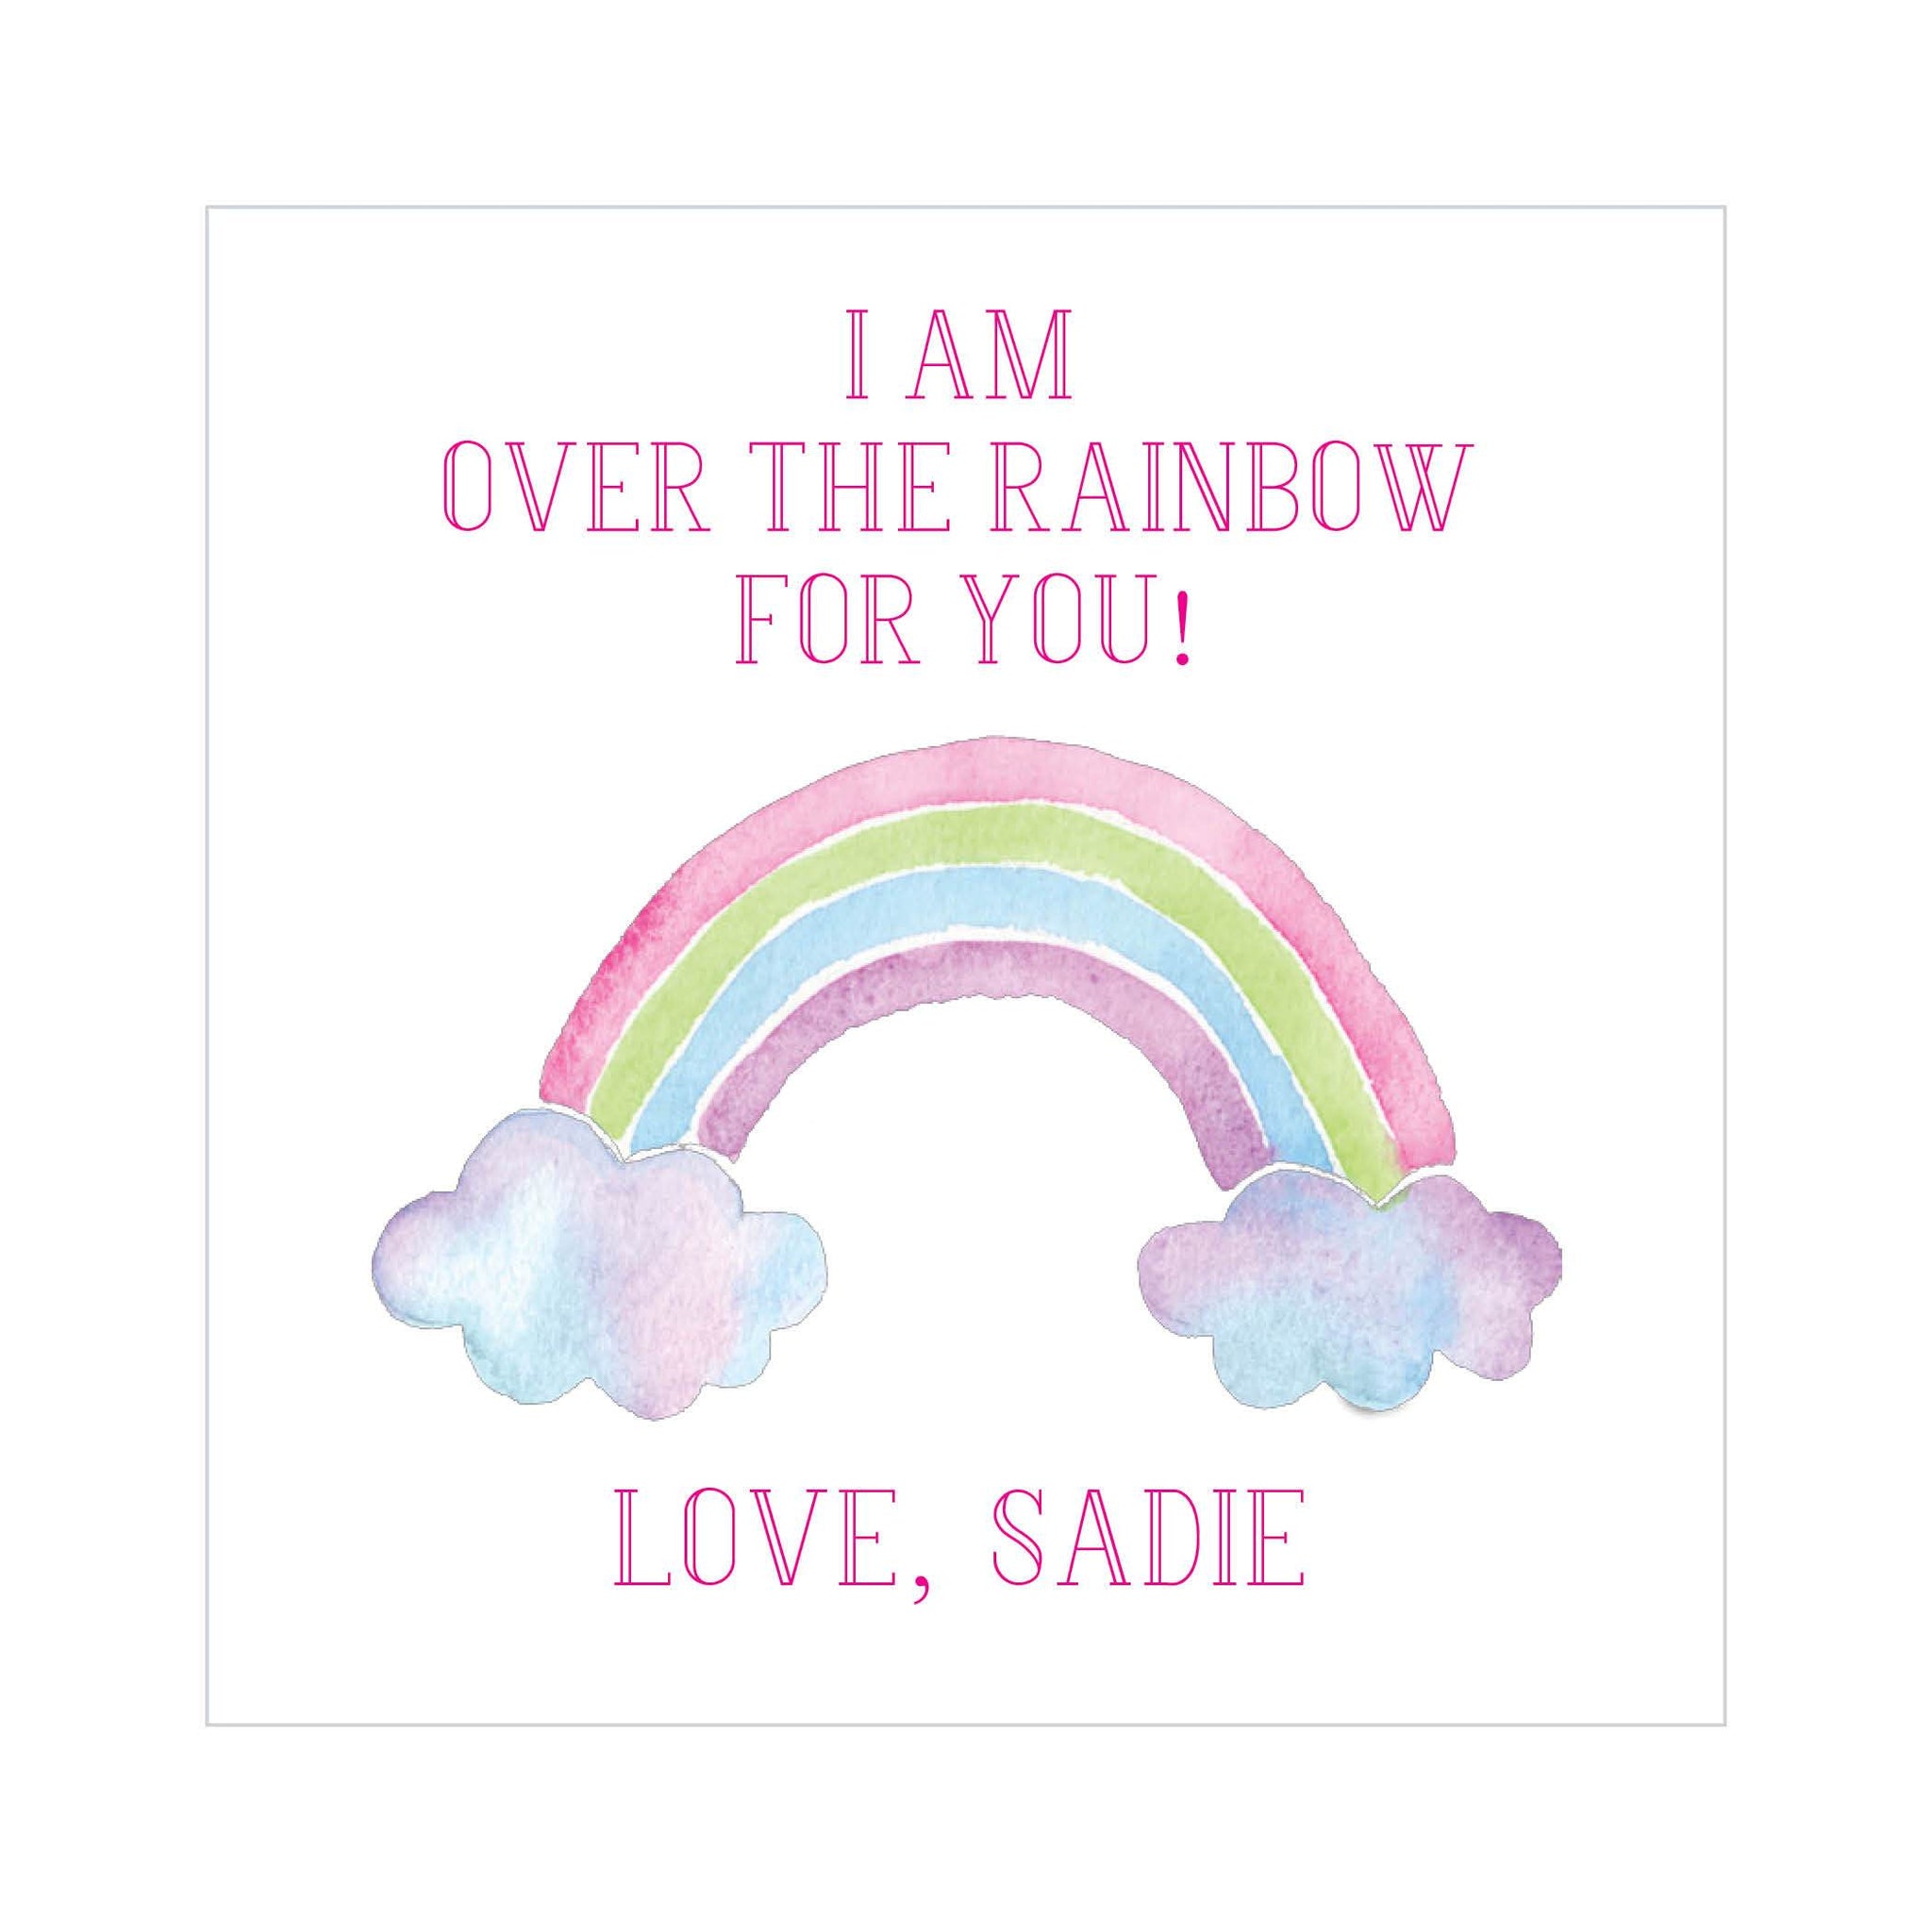 Over the Rainbow Valentine's Tags